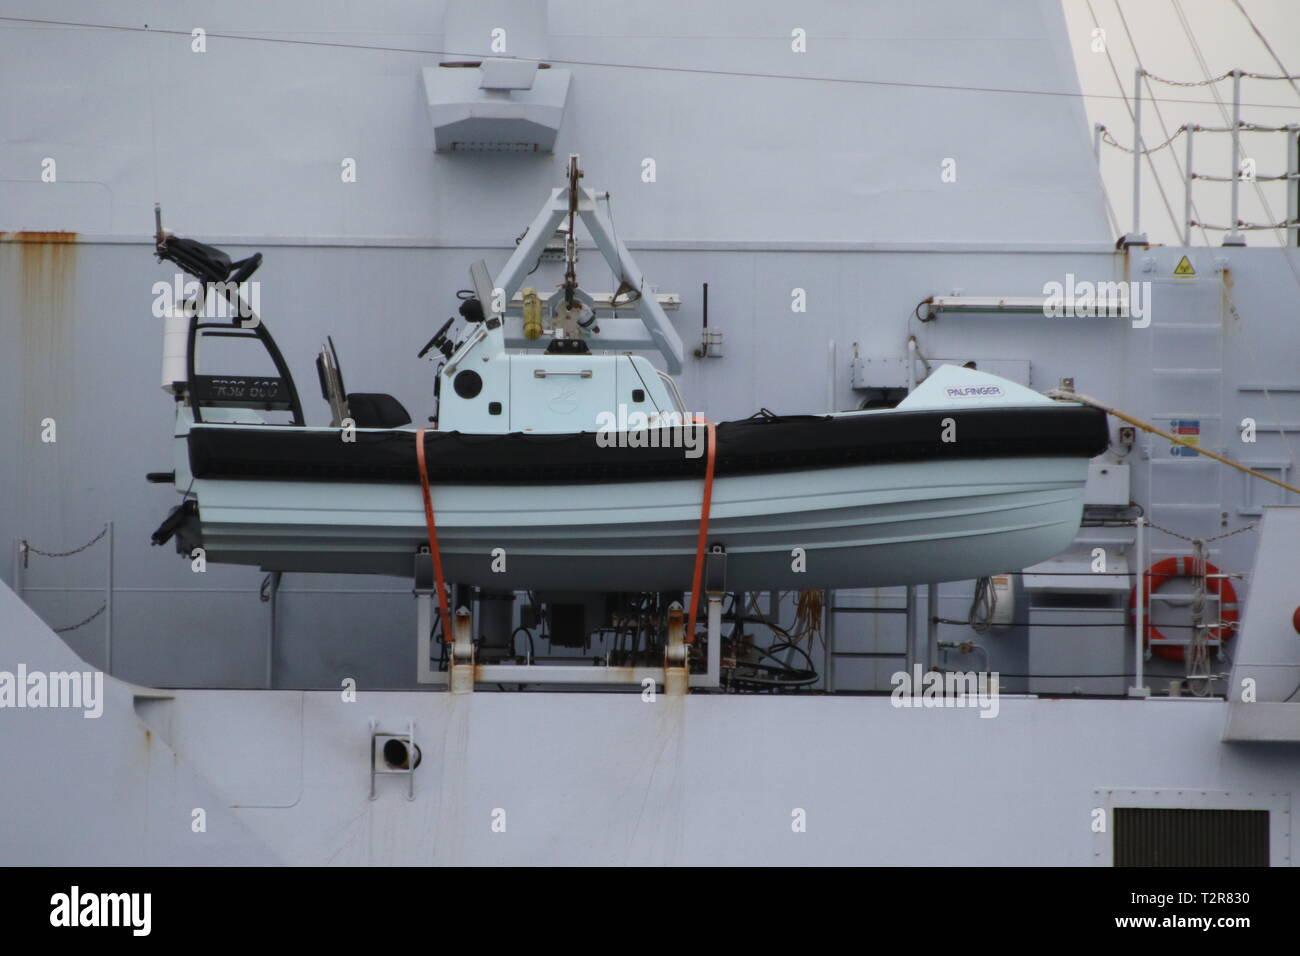 A Palfinger FRSQ 600 rescue craft on board HNLMS Friesland (P842), a Holland-class offshore patrol vessel operated by the Royal Netherlands Navy. Stock Photo